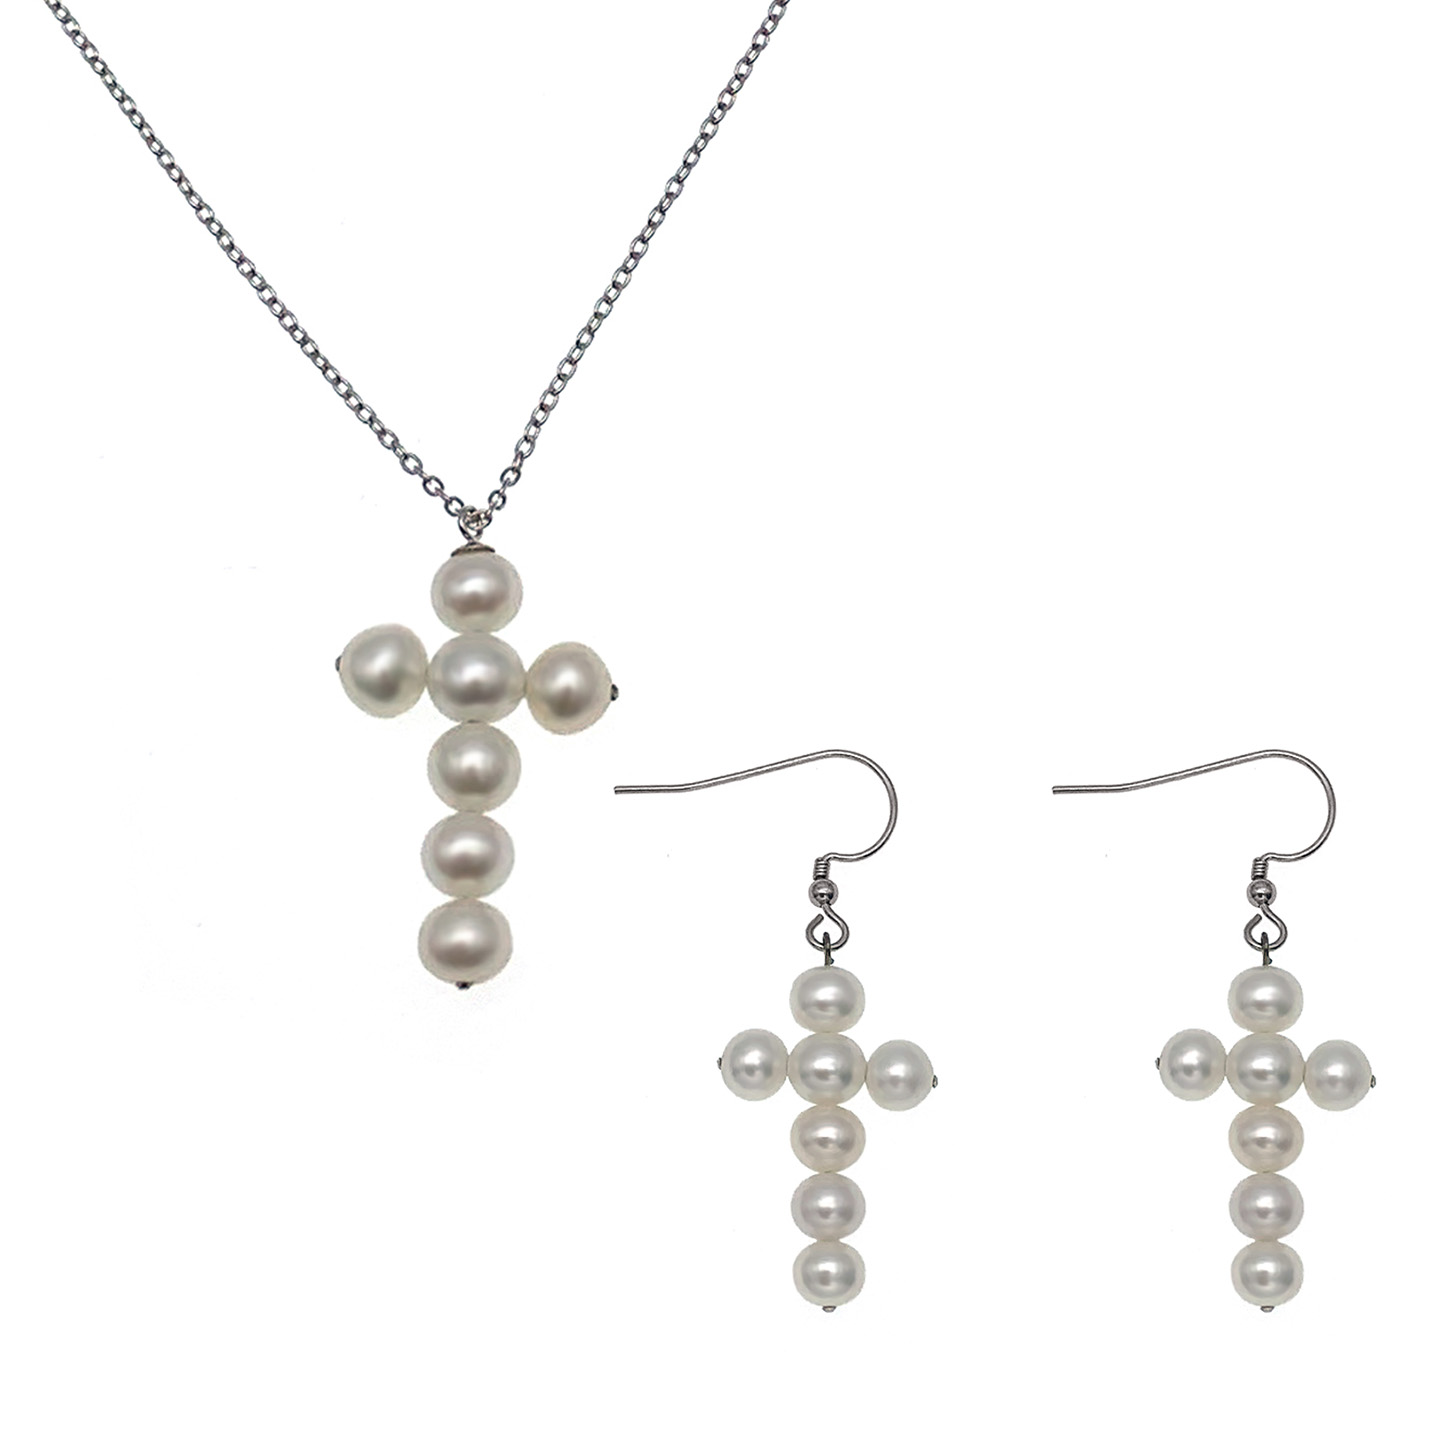 5-6mm Freshwater Pearl Pendant with Earring Set